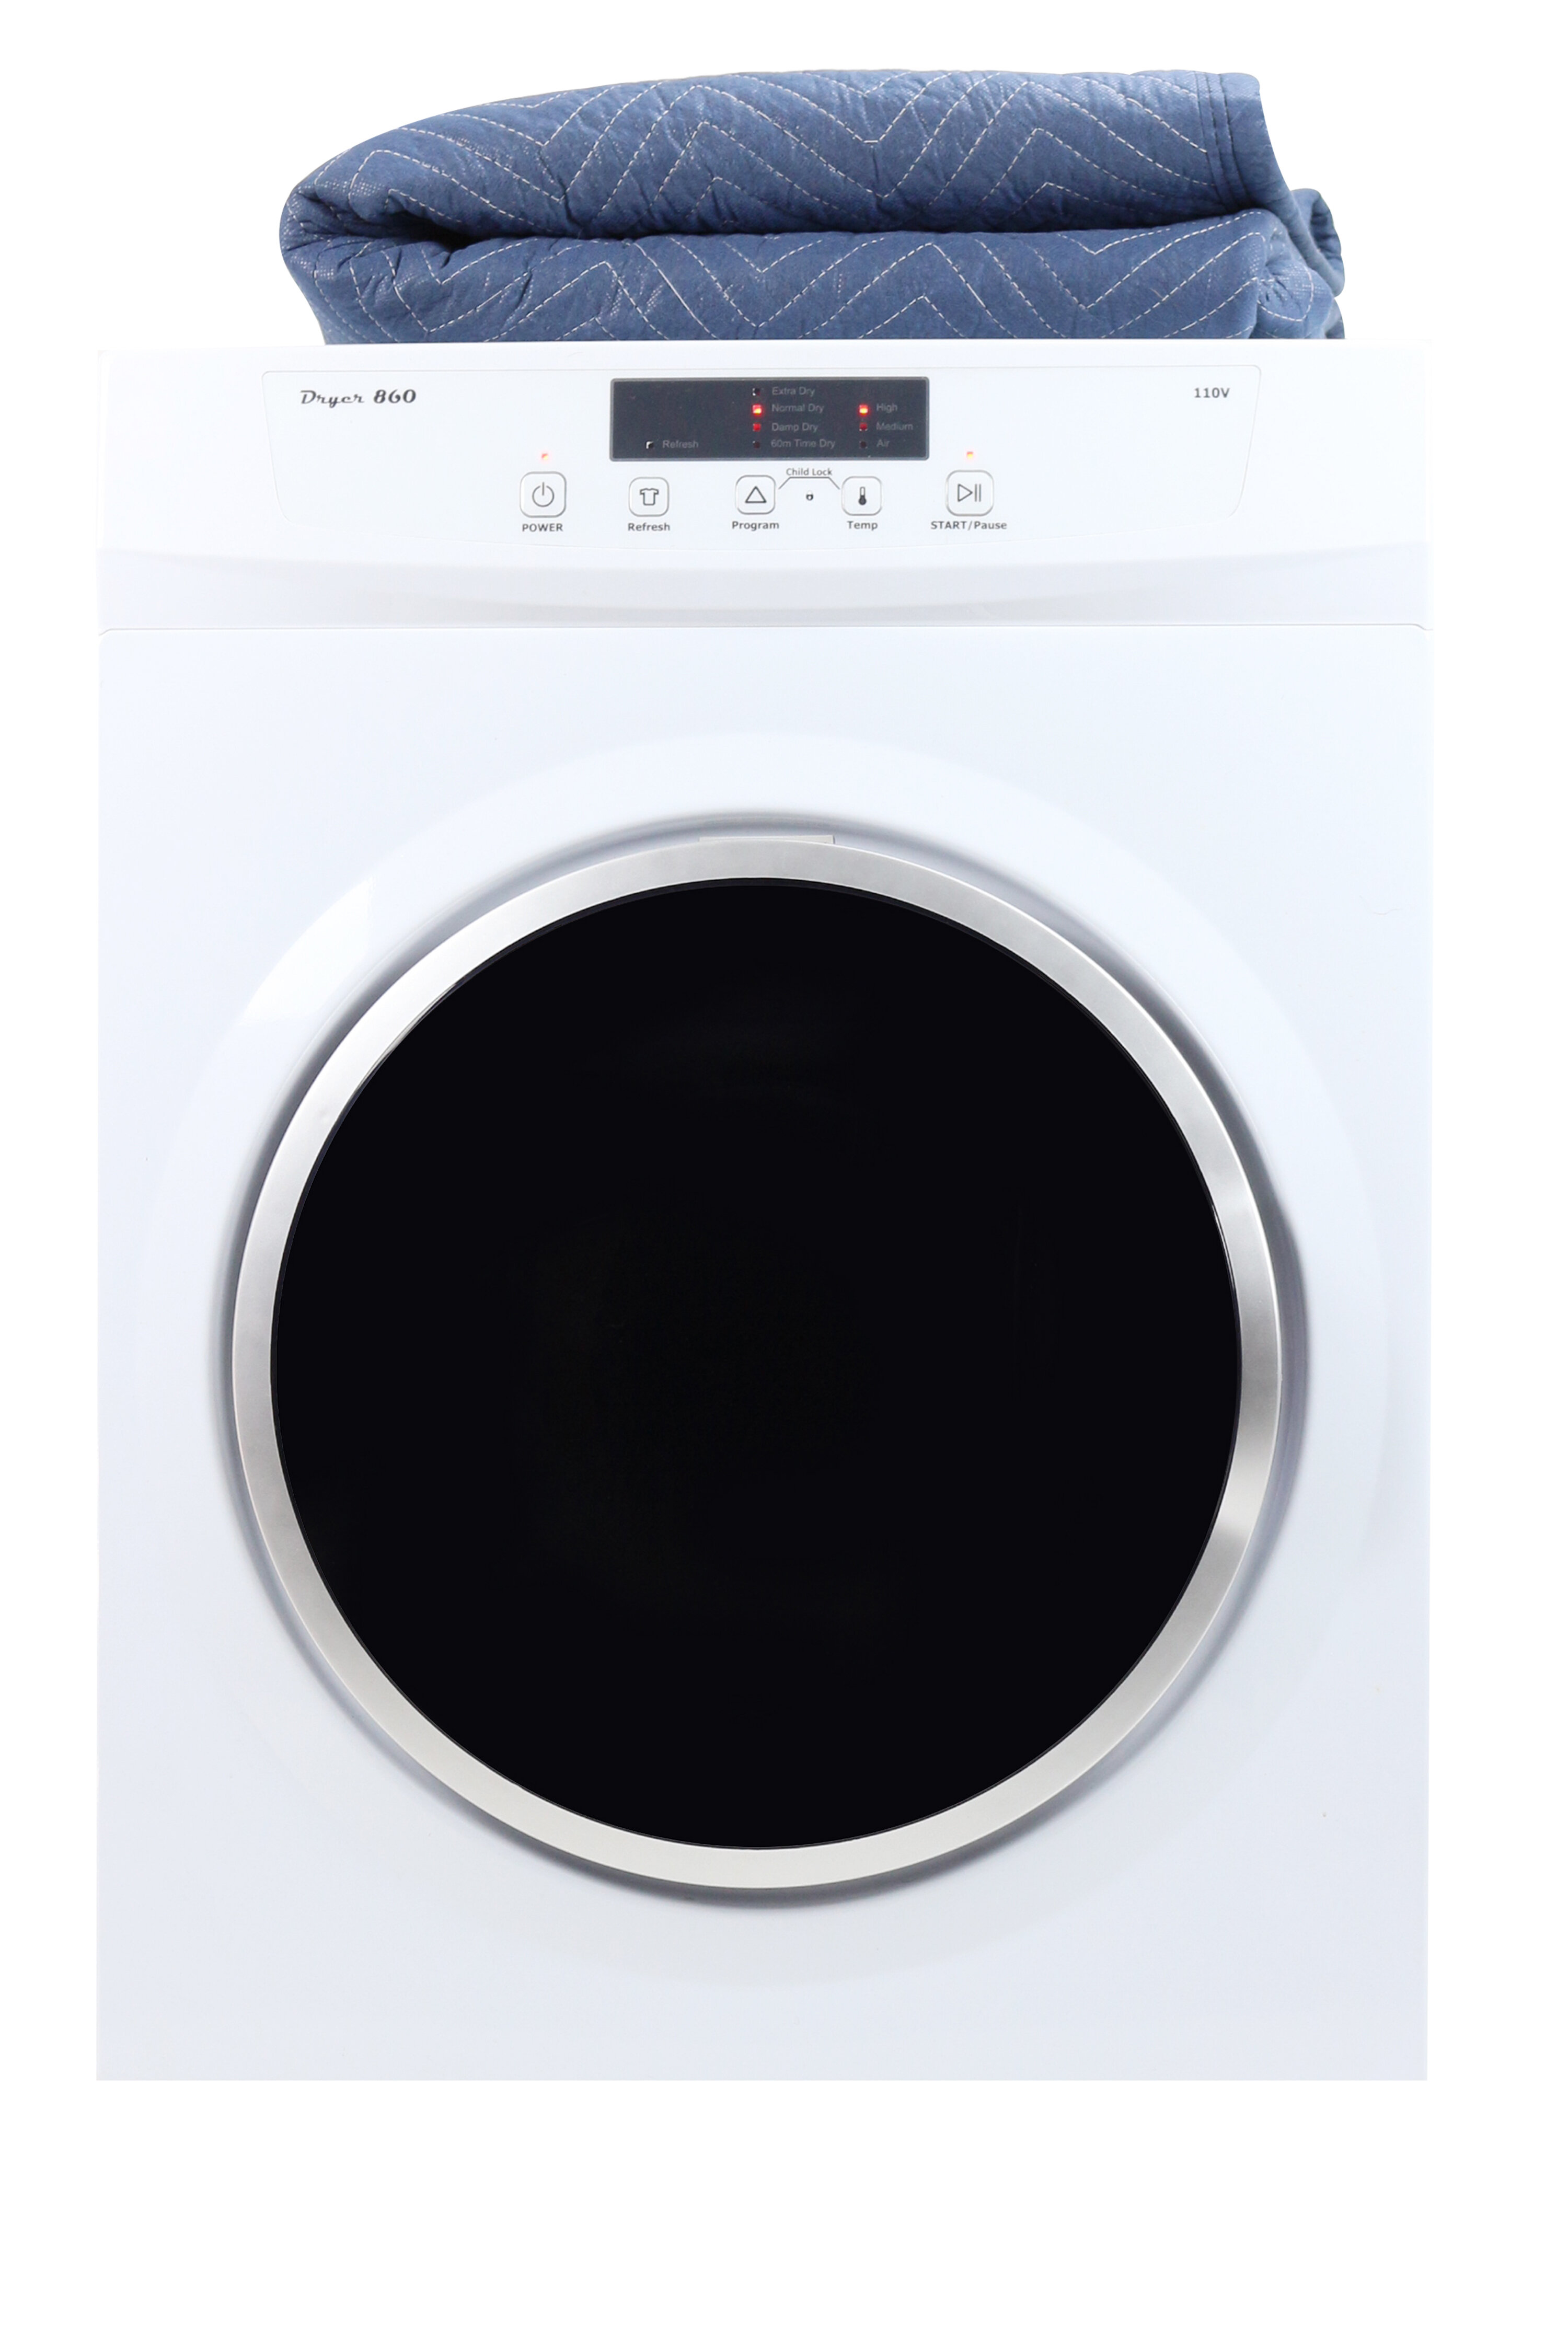 TABU Portable Laundry Dryer, Control Panel Upside Easy Control for 4  Automatic Drying Mode (White) & Reviews